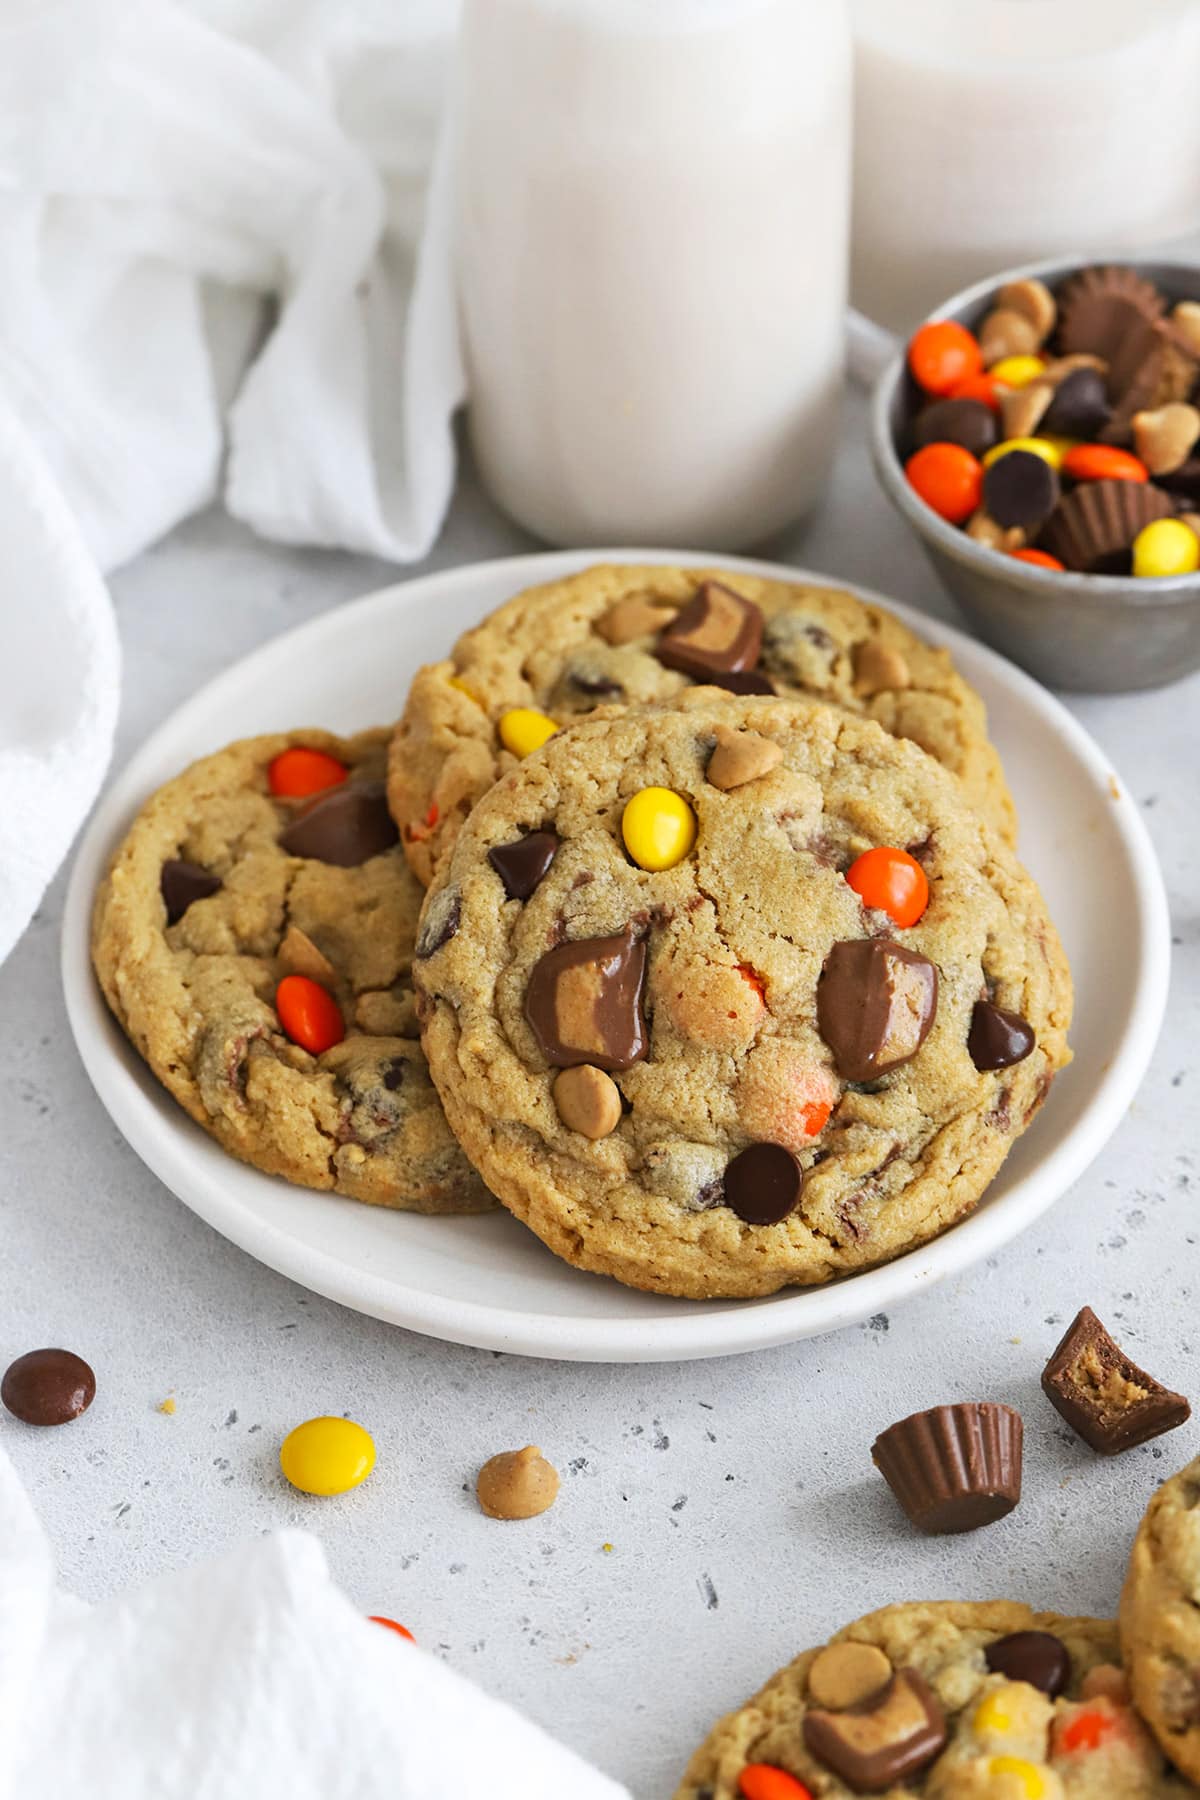 Front view of gluten-free Reese's cookies on a plate